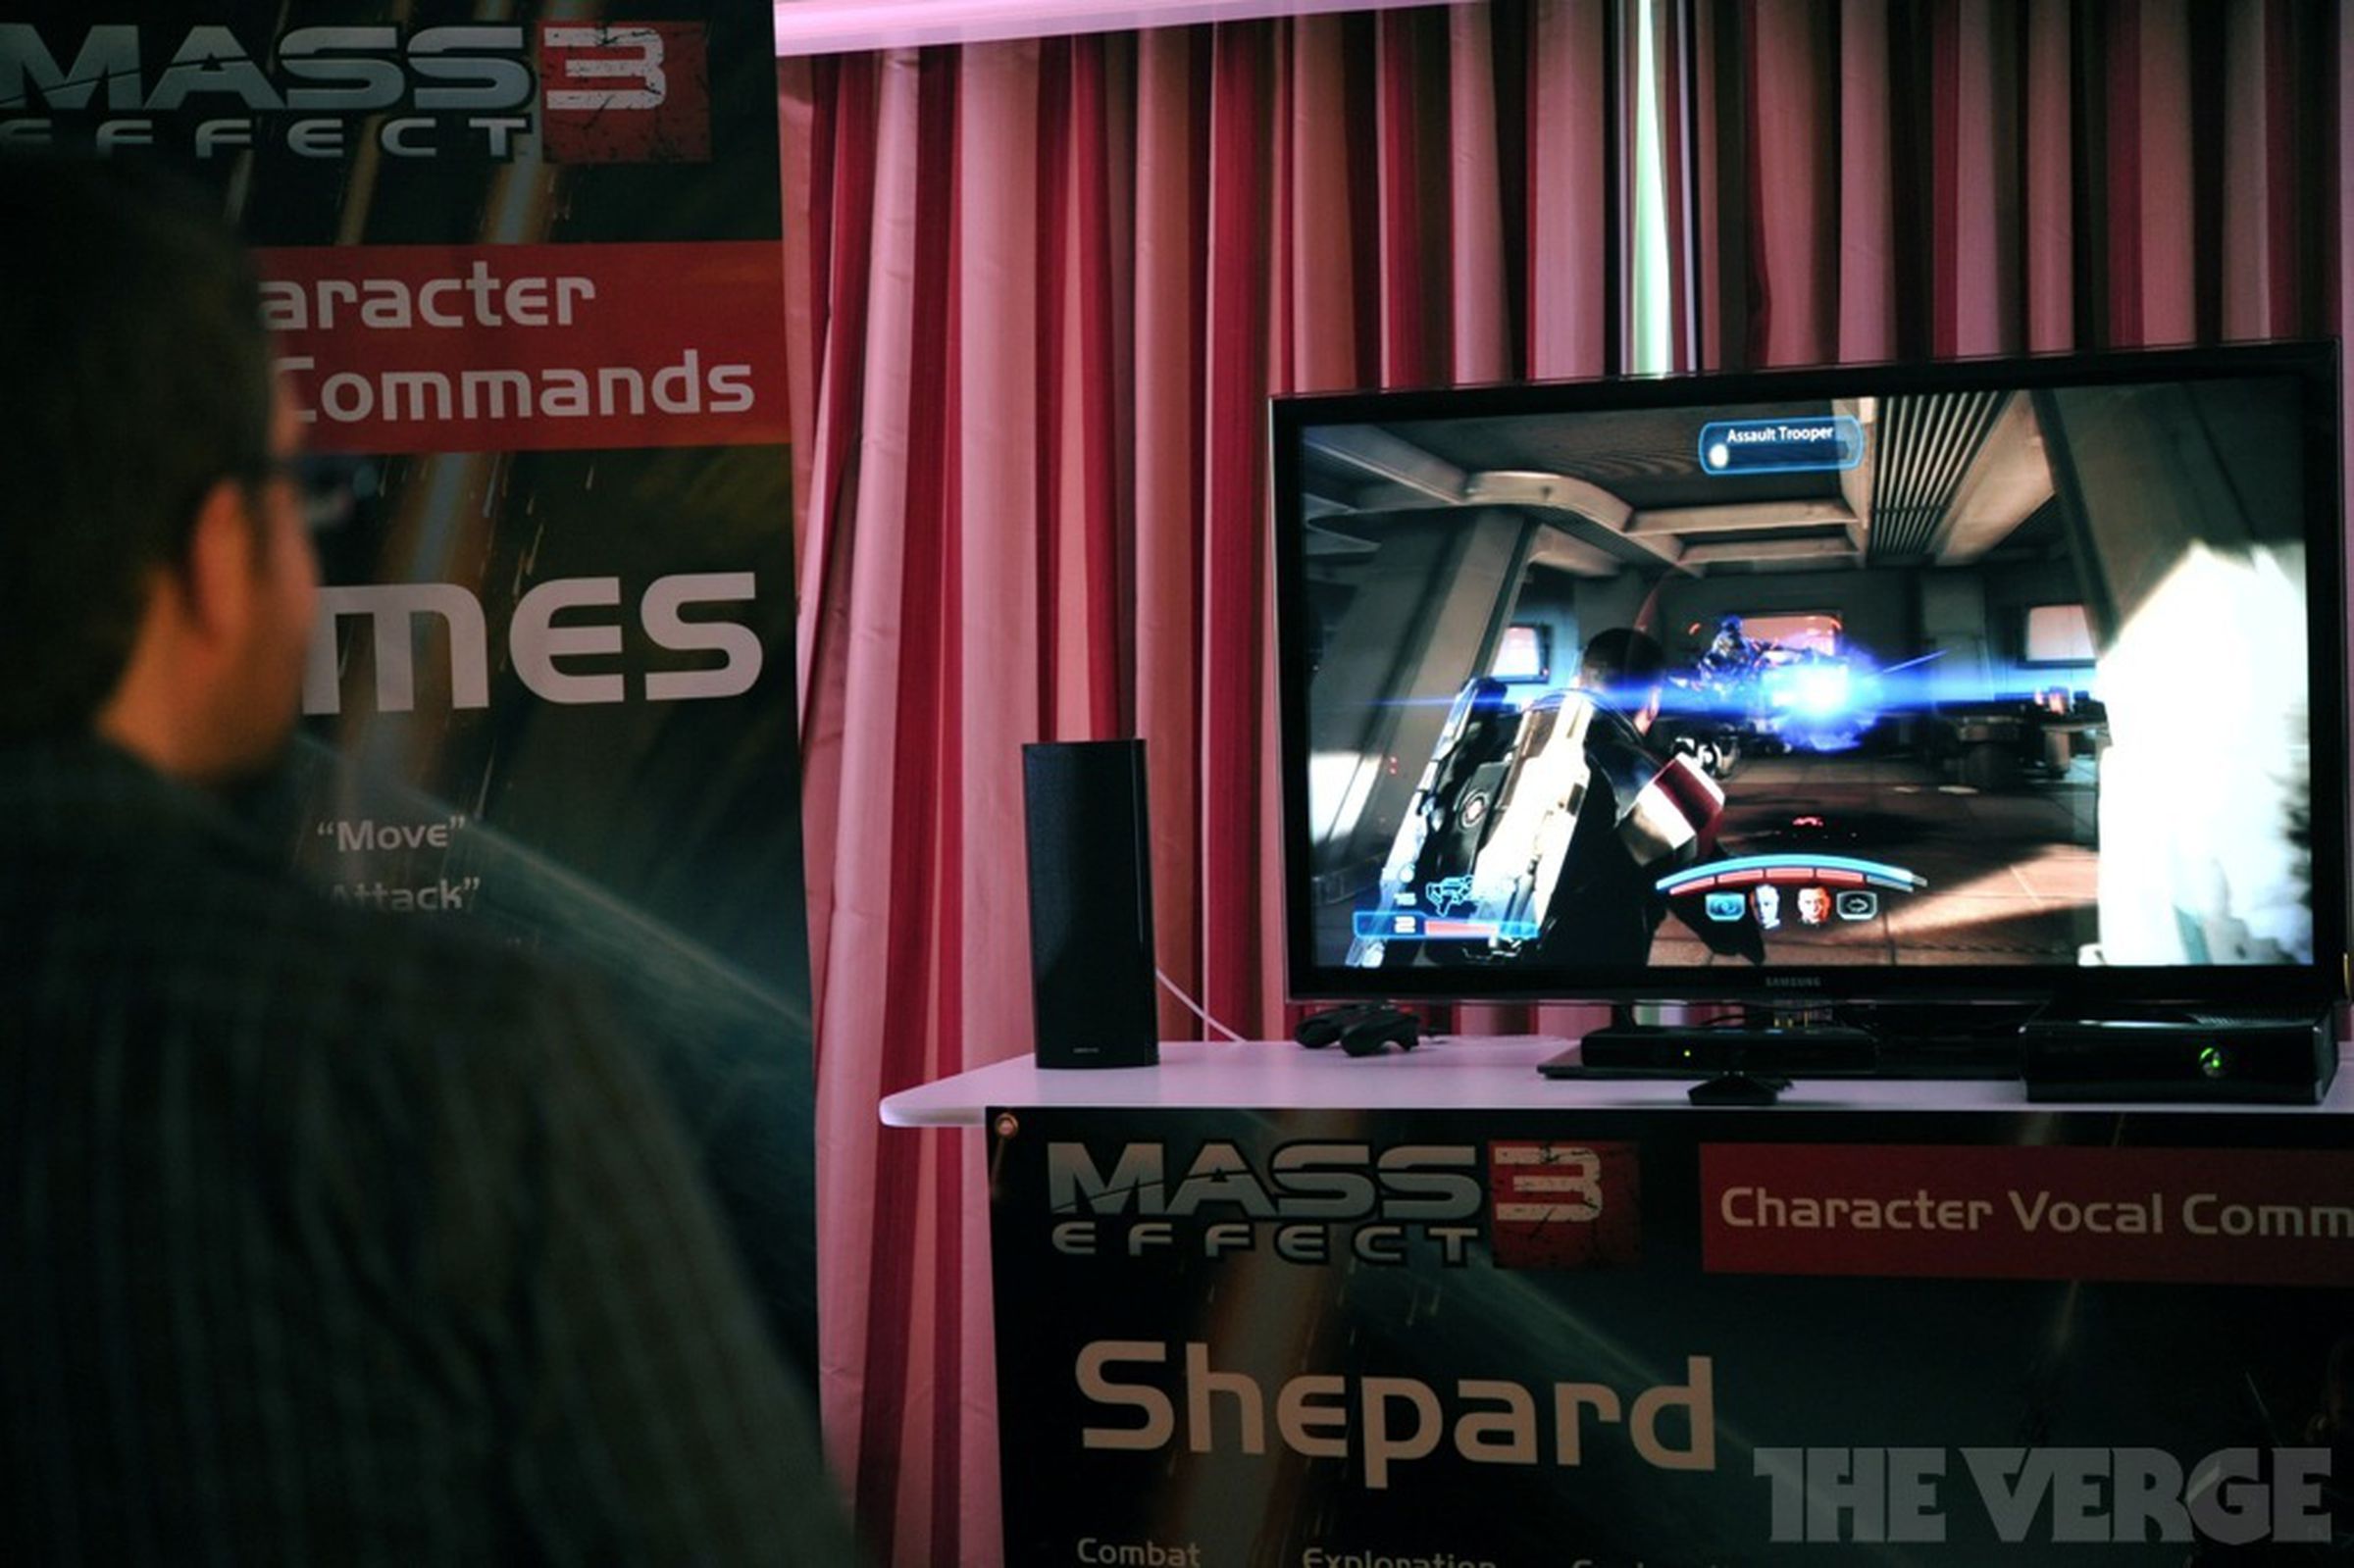 'Mass Effect 3' Kinect voice commands